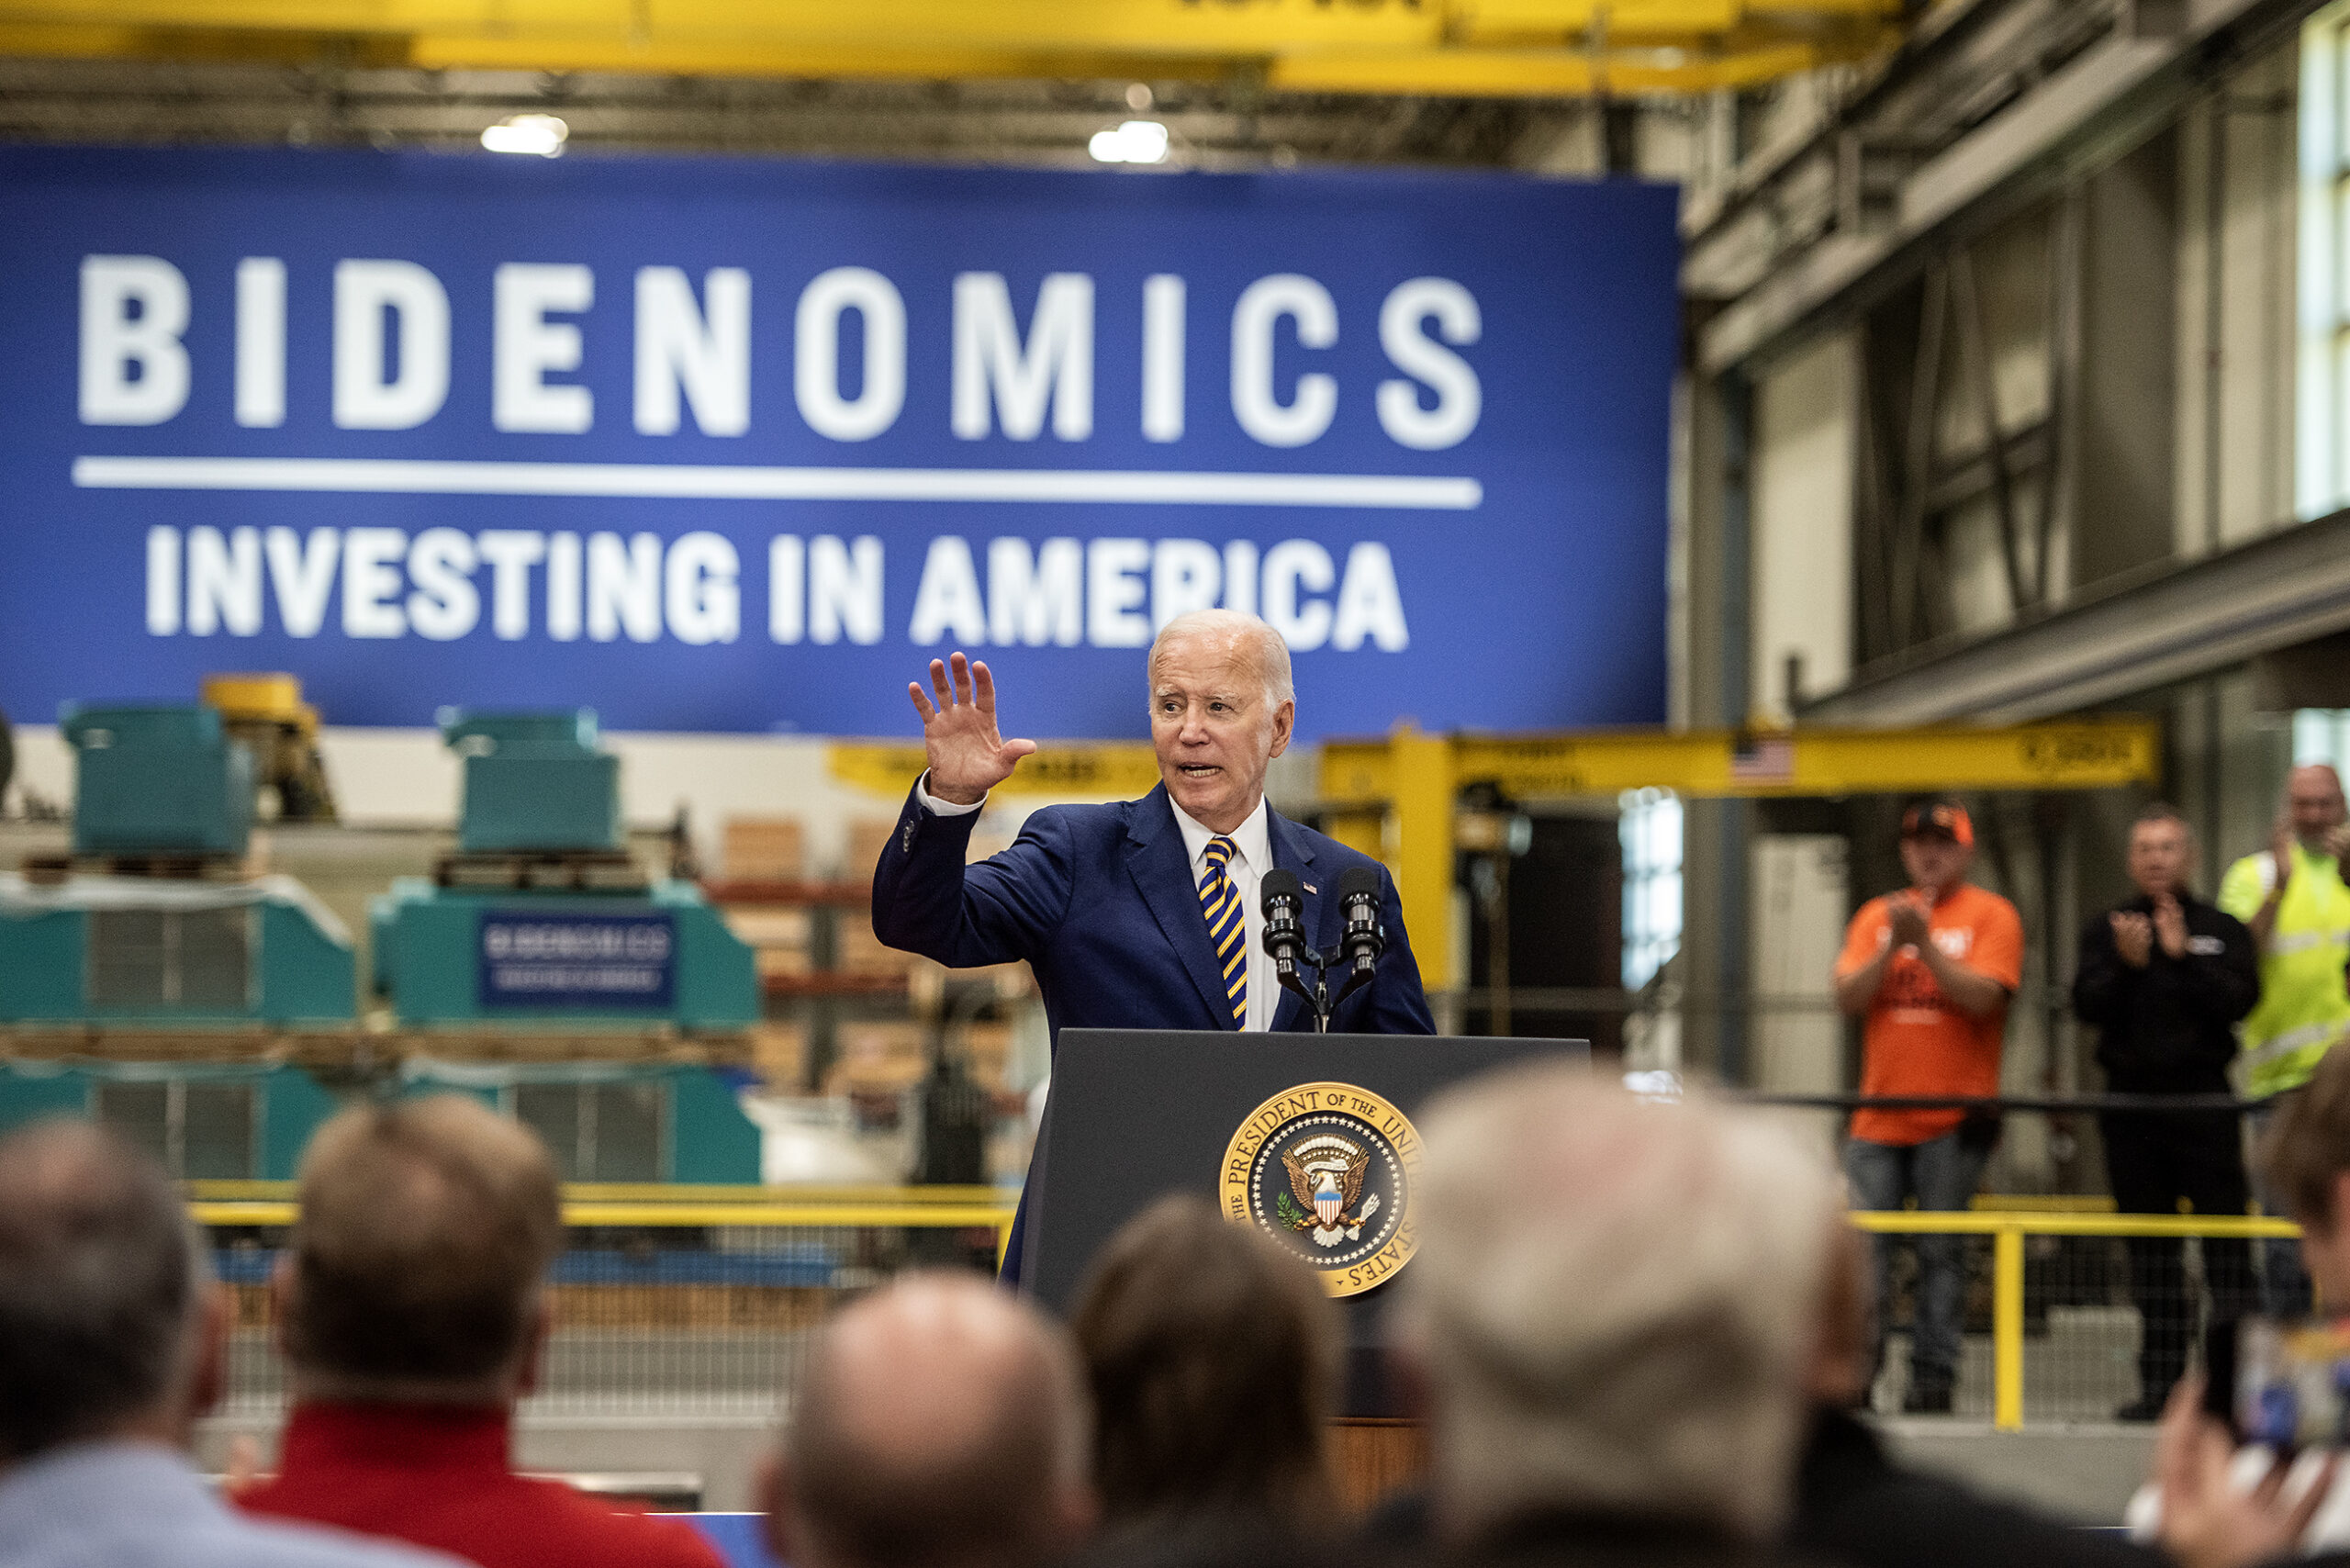 A large banner that says "Bidenomics" can be seen behind President Biden as he speaks from a stage.